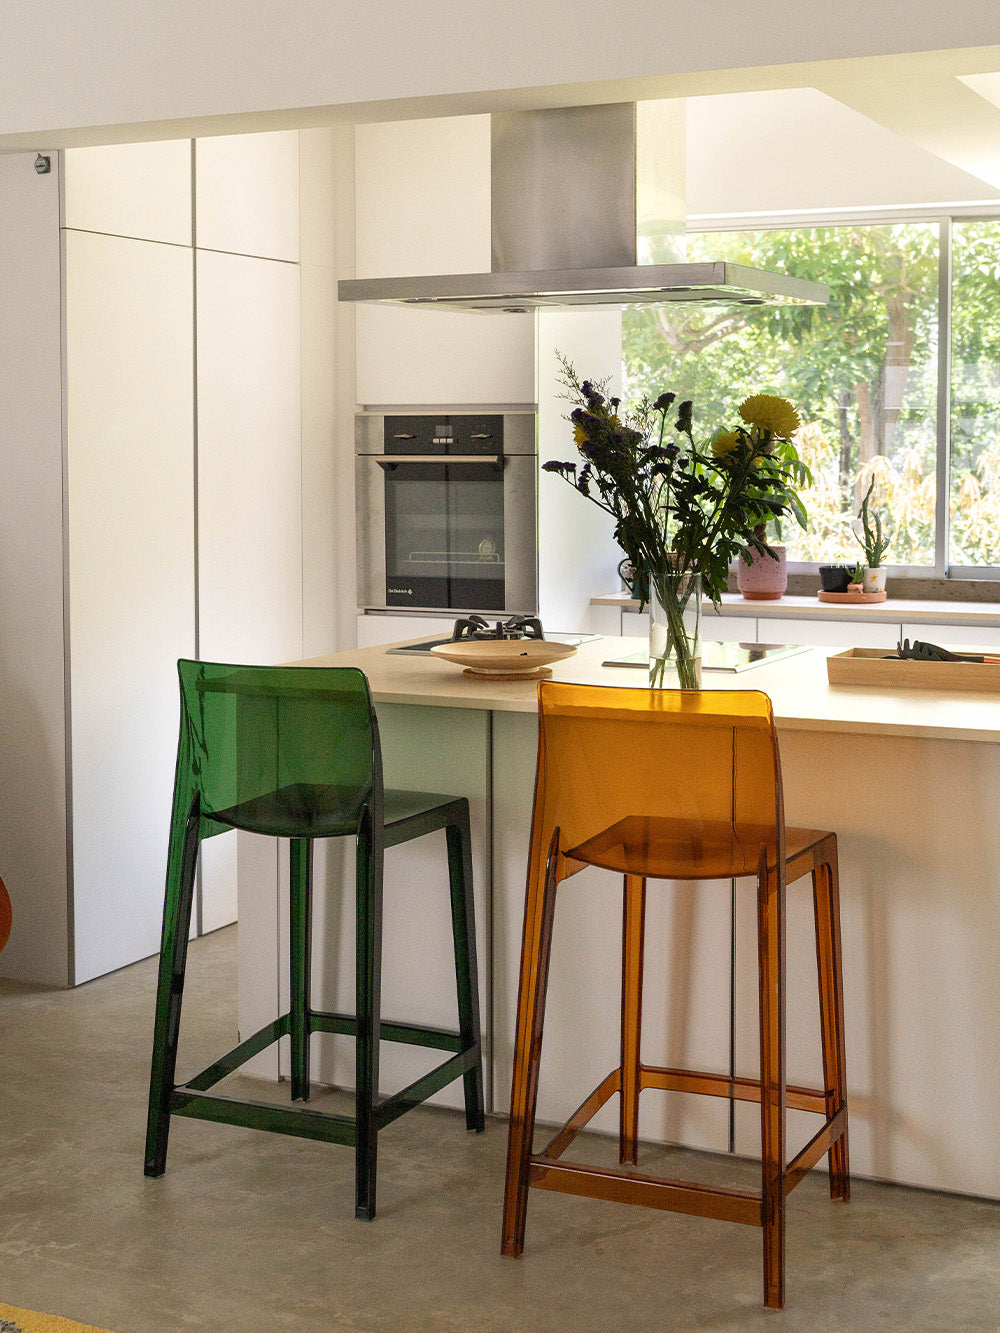 open-kitchen-space-two-chairs